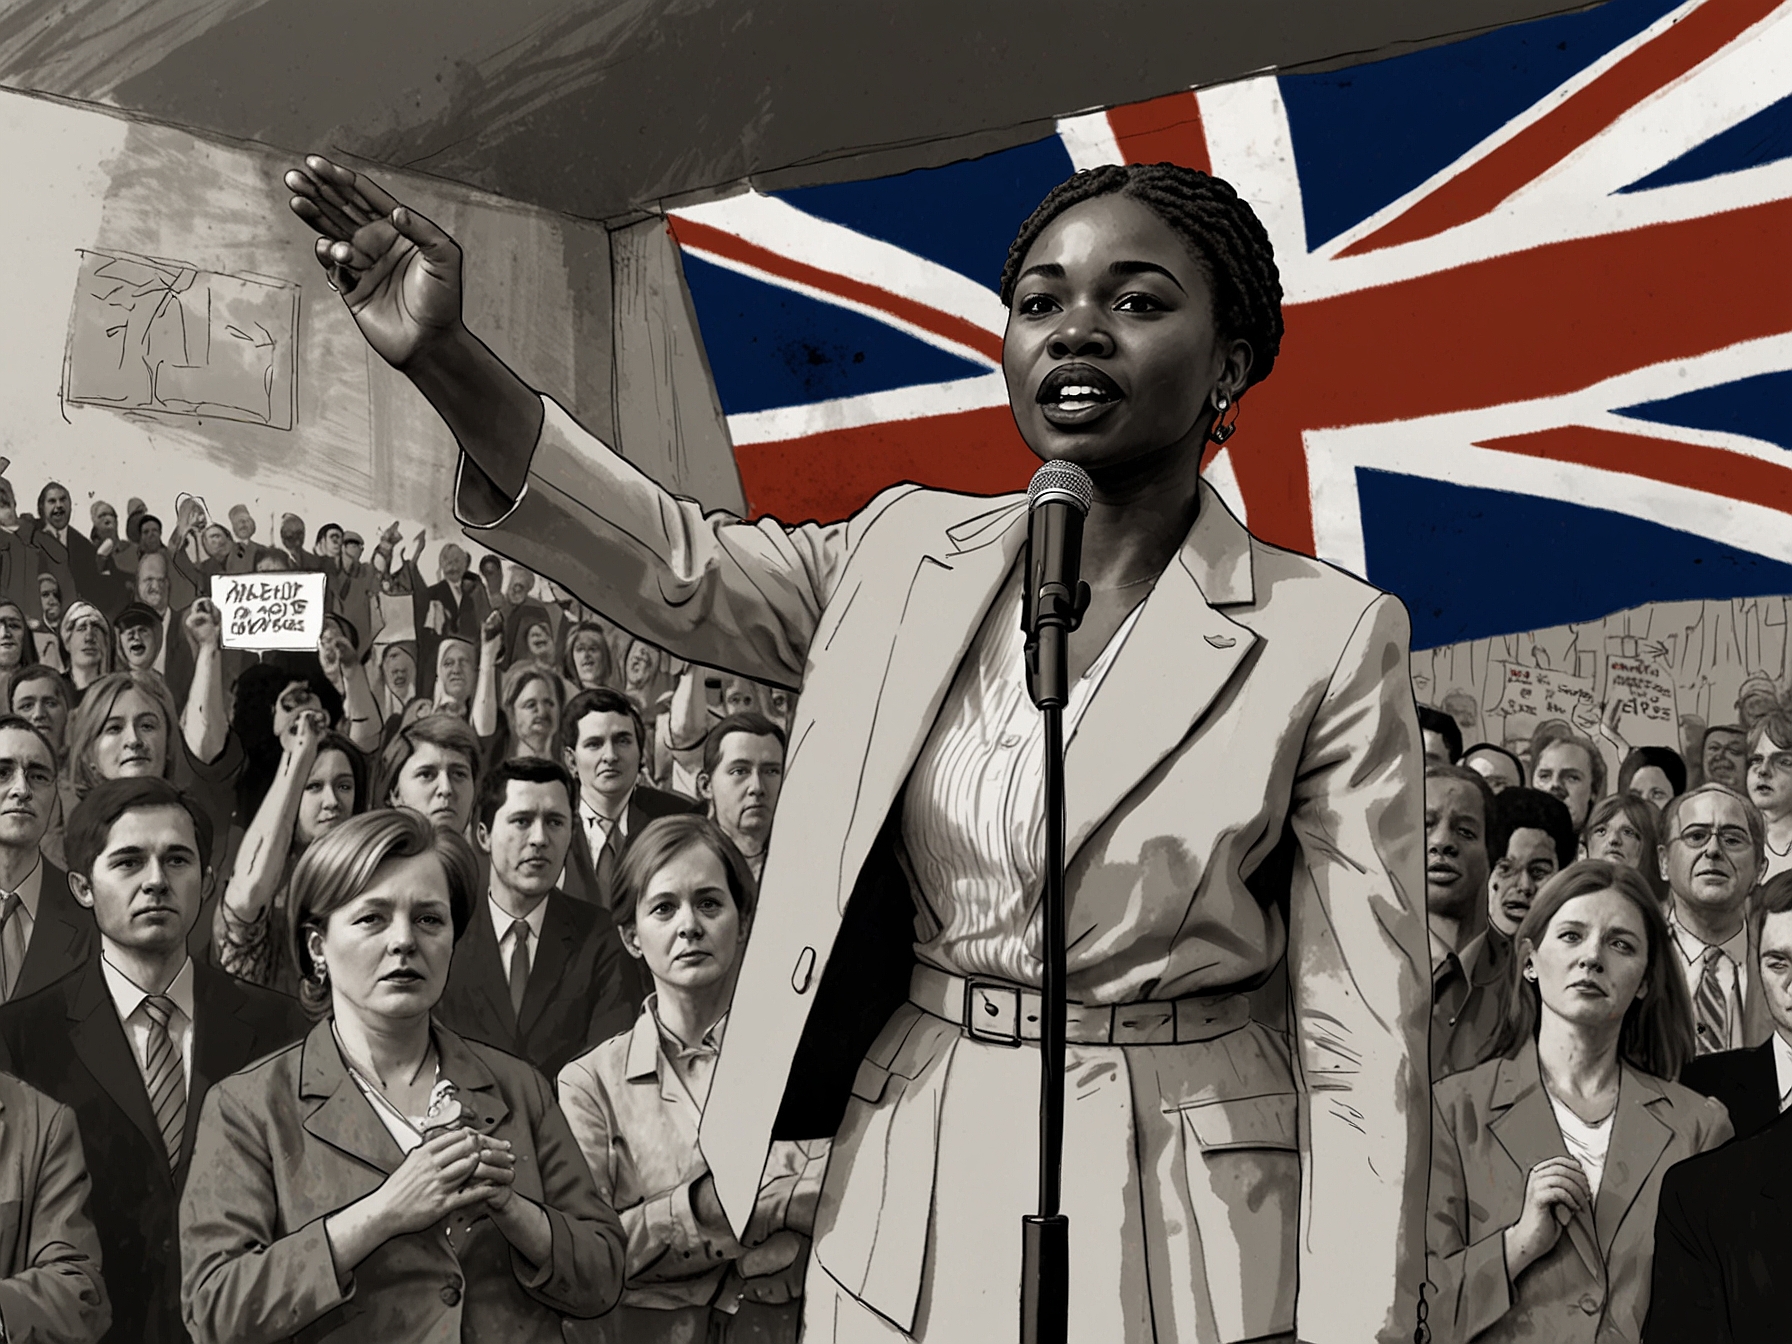 Kemi Badenoch speaking passionately at a Conservative Party rally, emphasizing the need for unity and urging former Tory voters to return to the party instead of supporting Reform UK.